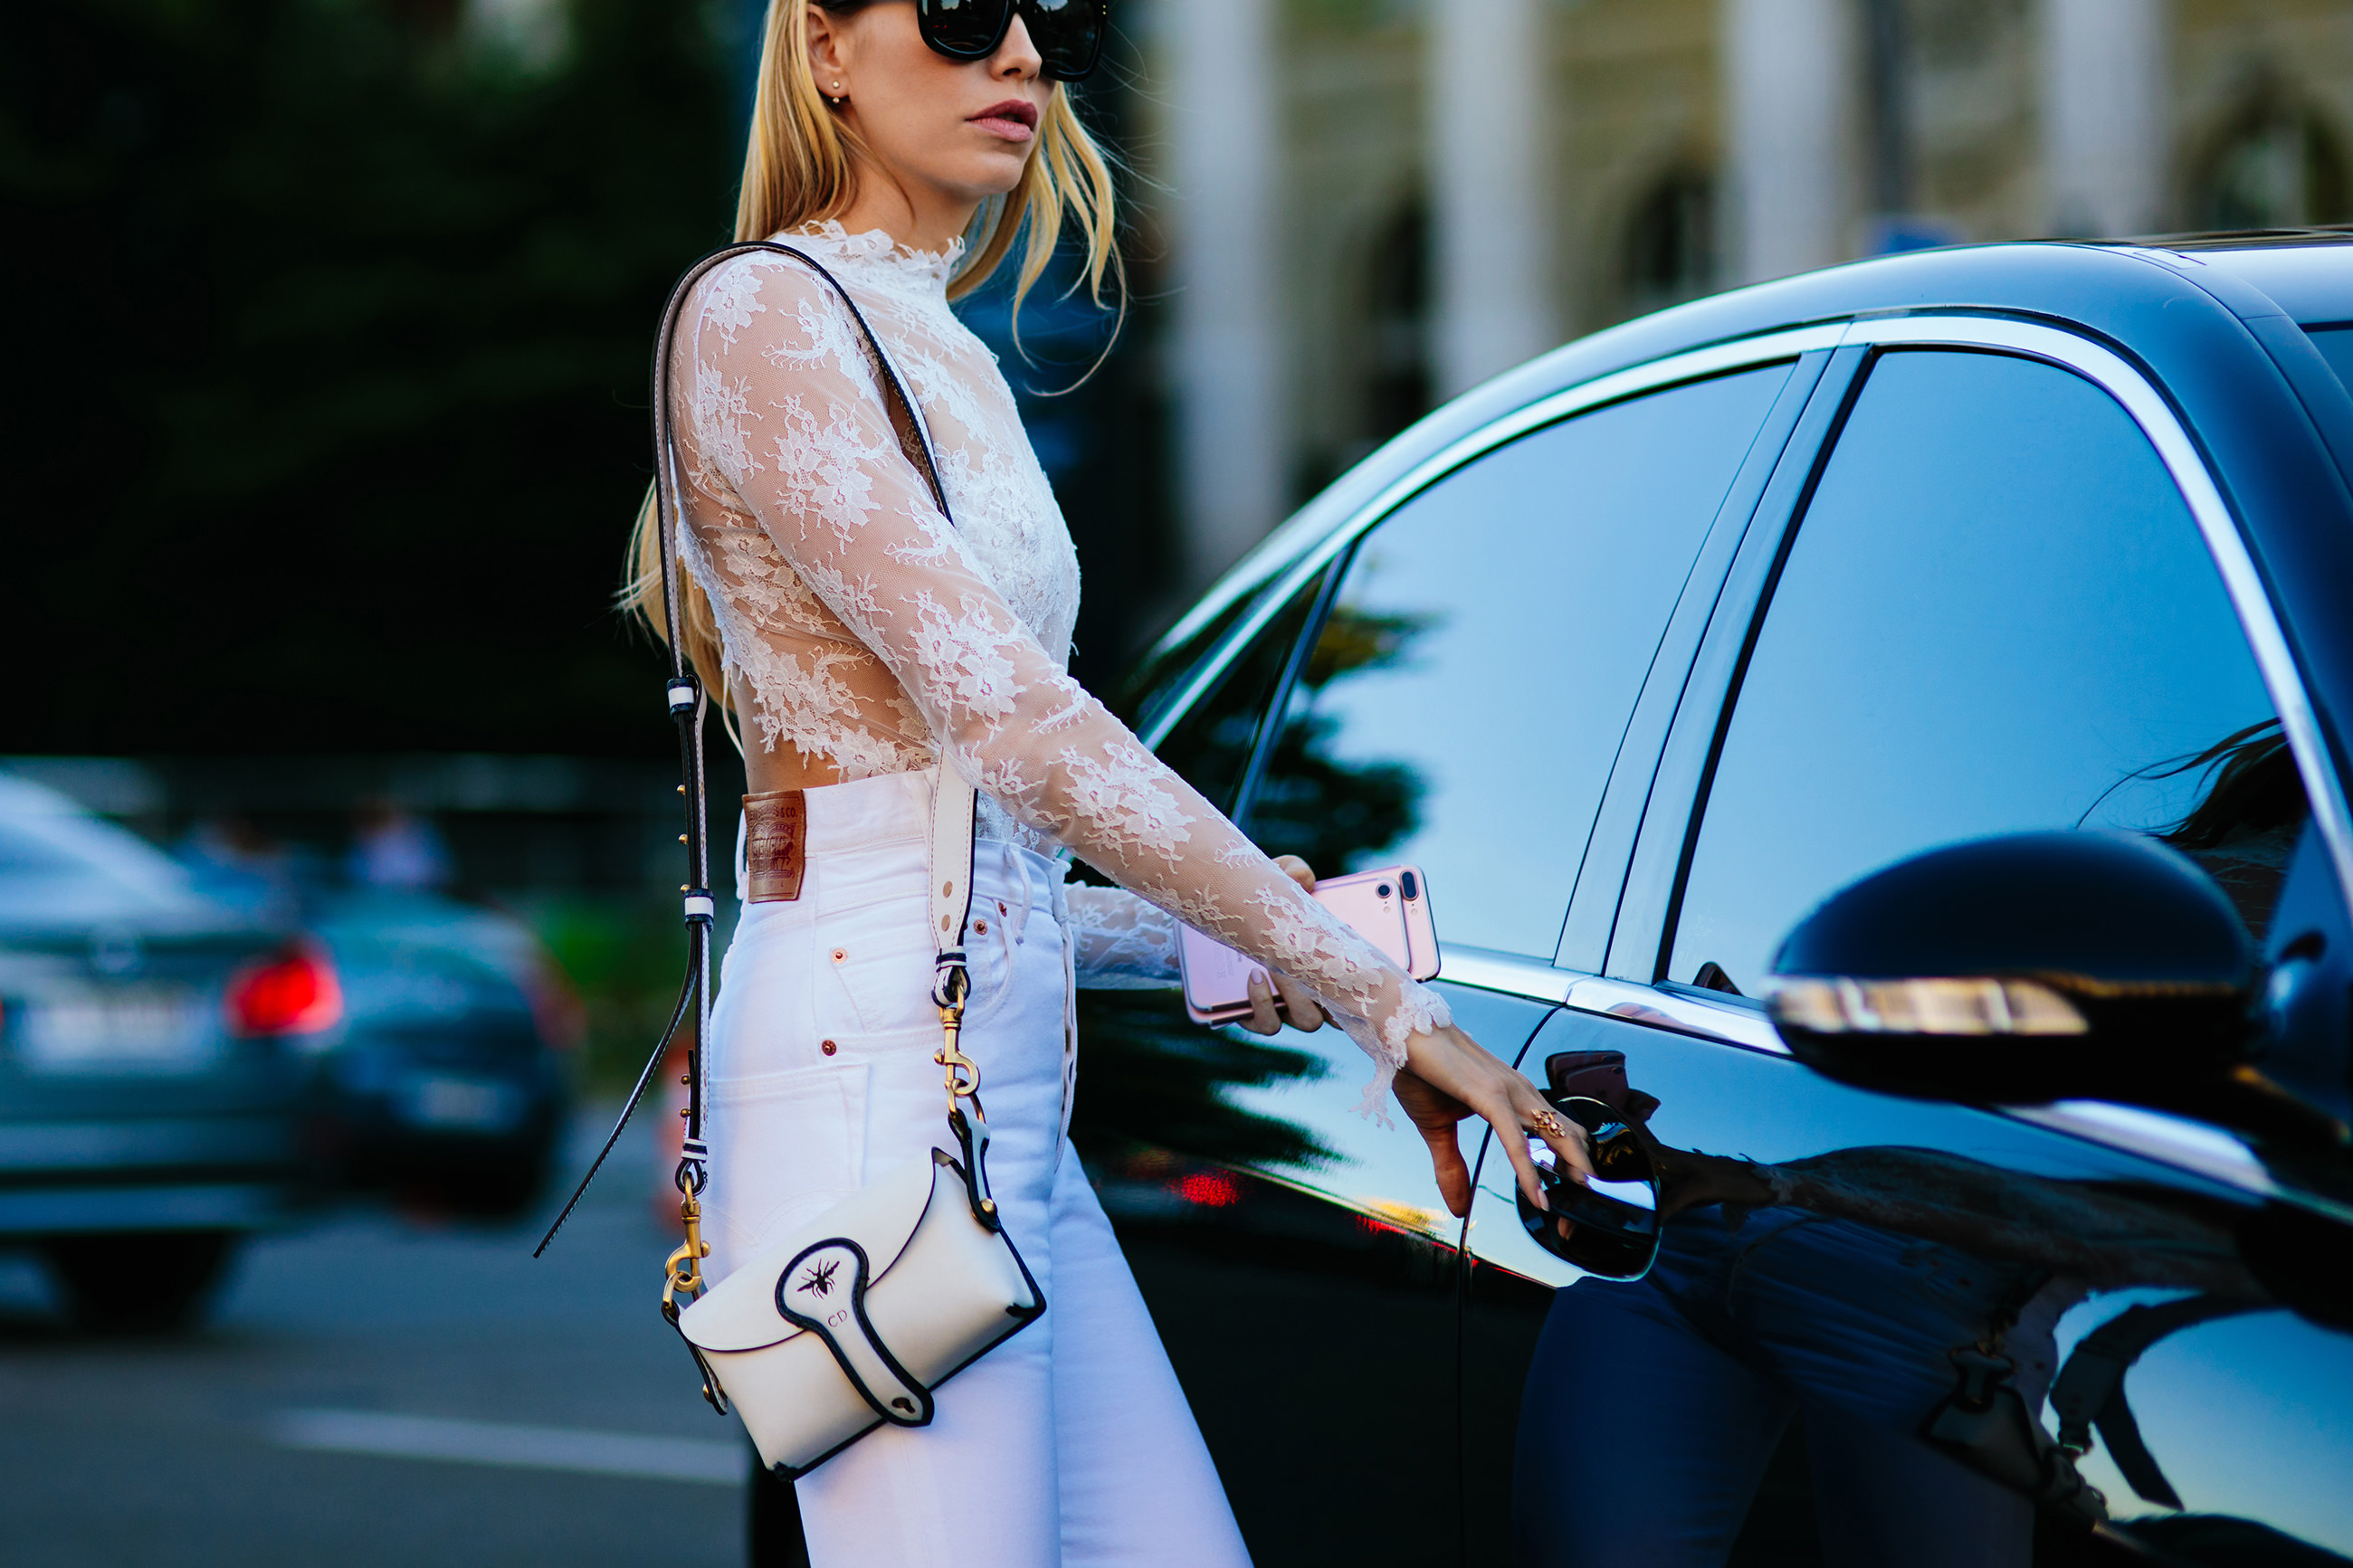 Elena Perminova wearing white Vetements x Levis  jeans and white lace top after the Dior Couture Fashion Show